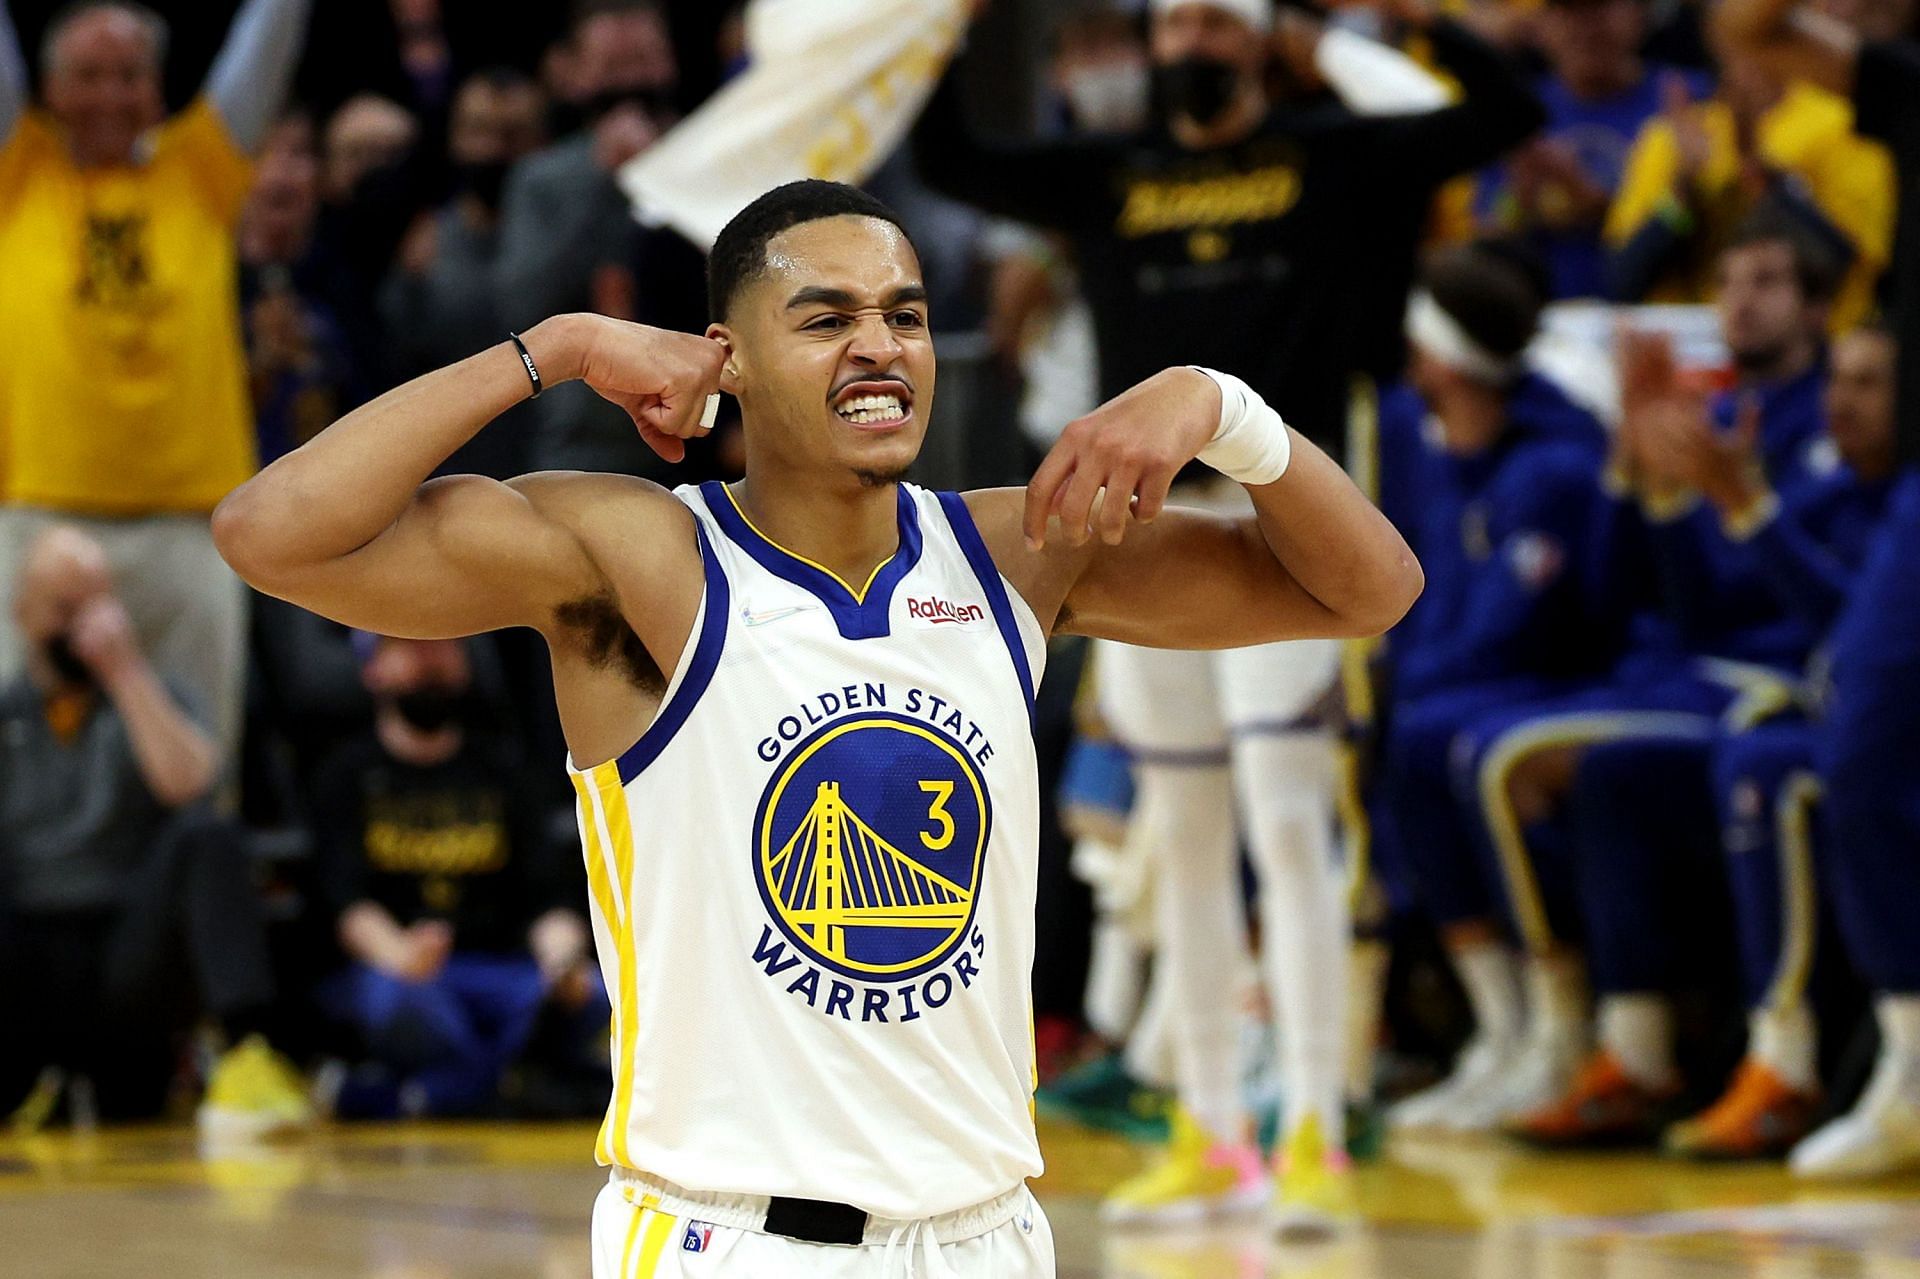 Jordan Poole played a vital role for the Golden State Warriors last season